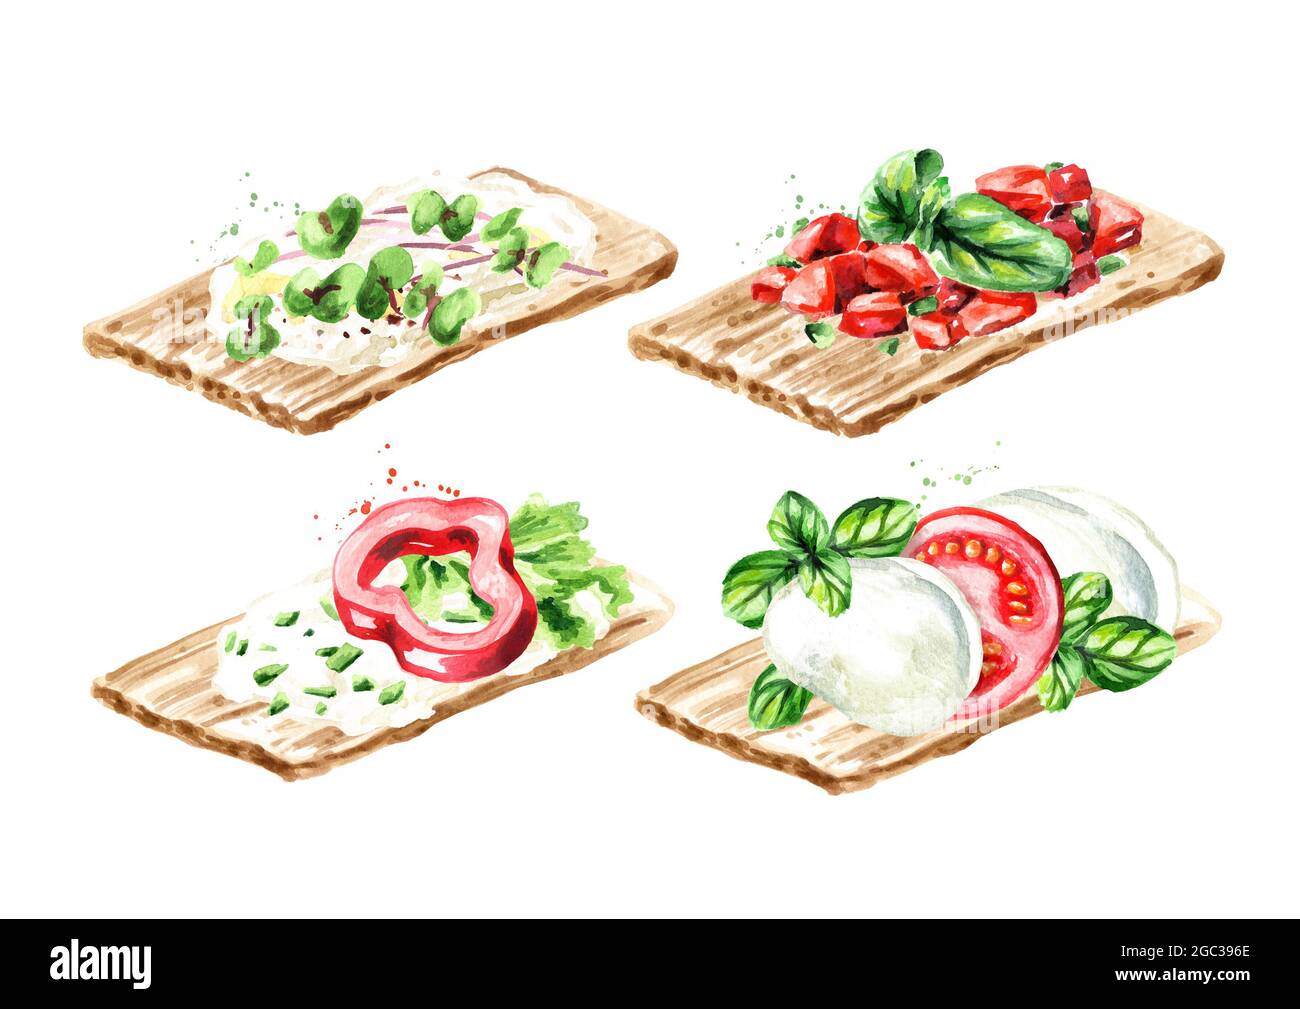 Crispbread with vegan, vegetarian toppings set. Watercolor hand drawn  illustration, isolated on white background.tif Stock Photo - Alamy